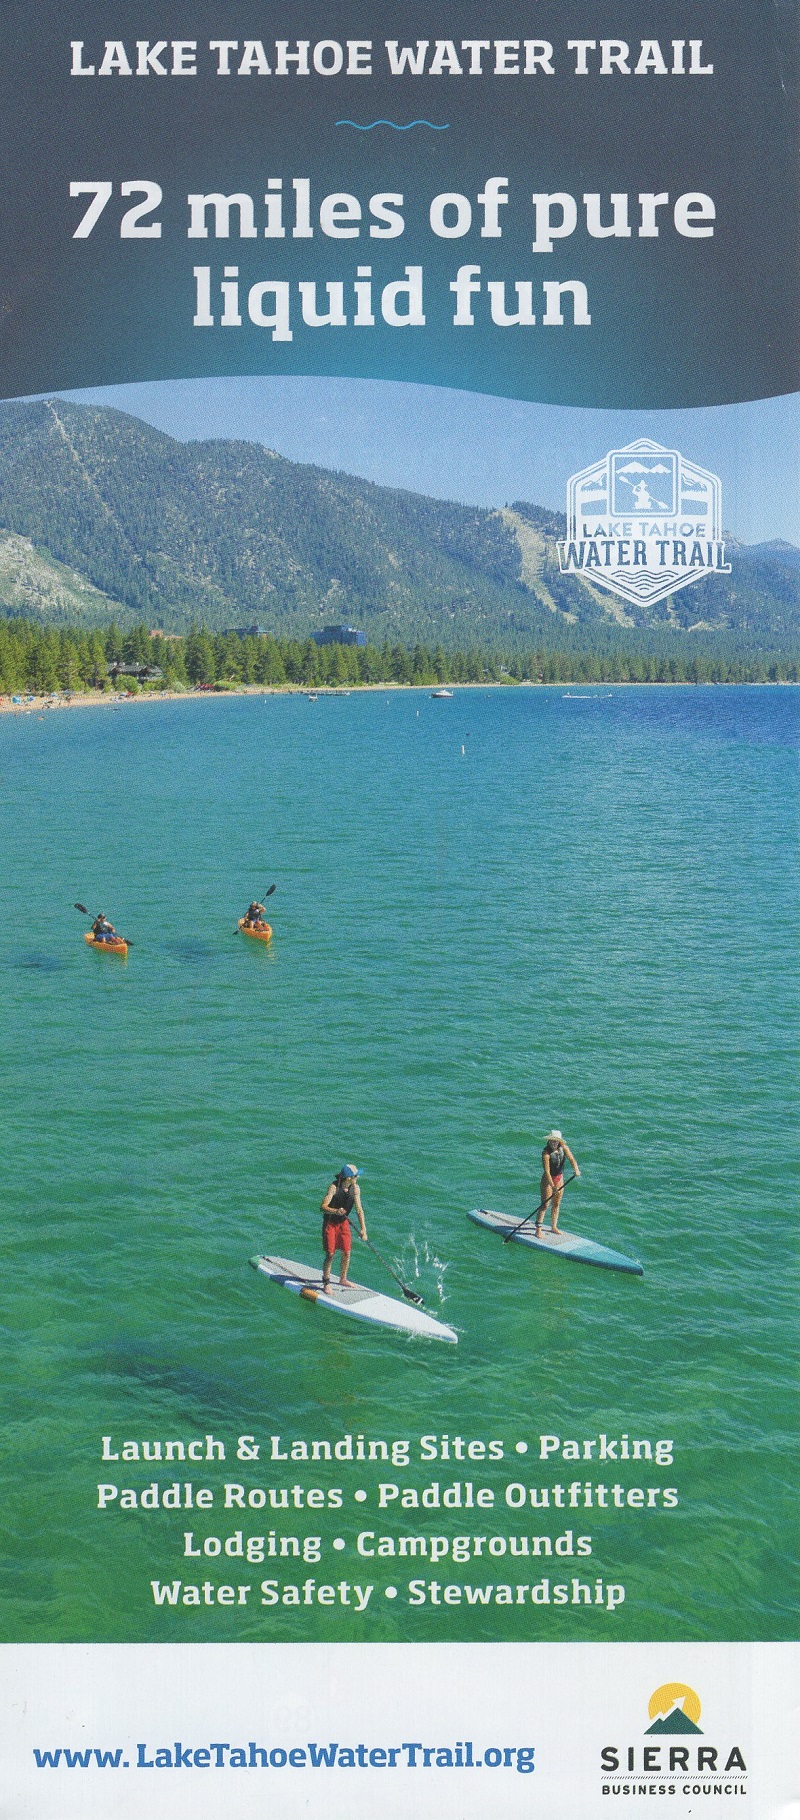 Things to Do in South Lake Tahoe, CA, Attractions, Activities VisitorTips